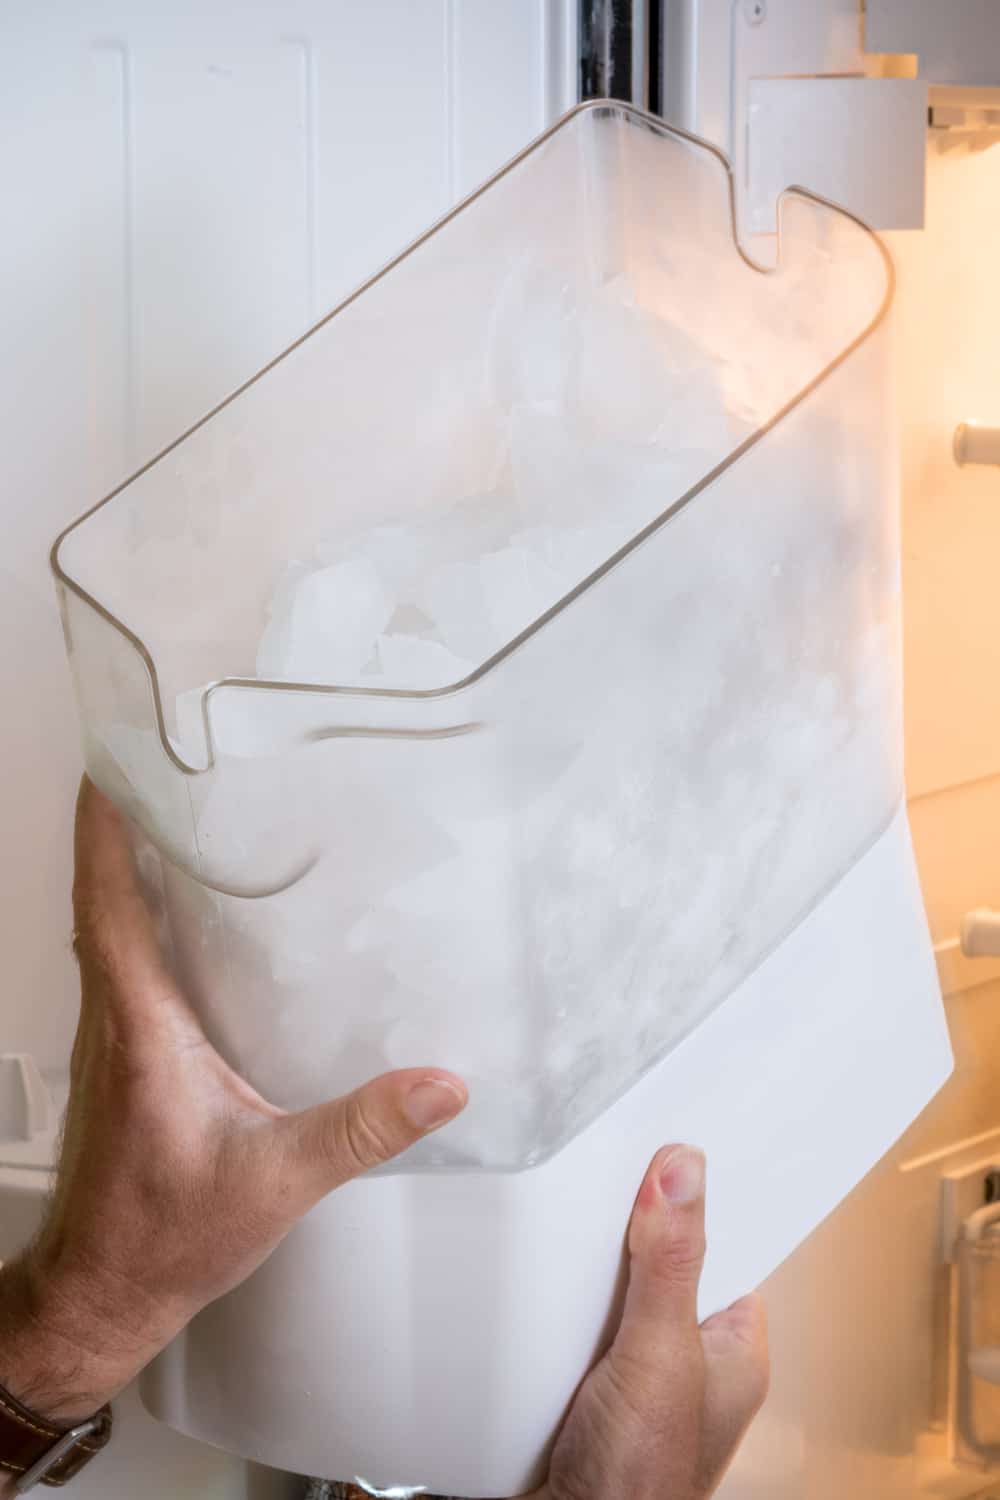 15 Homemade Ice Maker Plans You Can DIY Easily